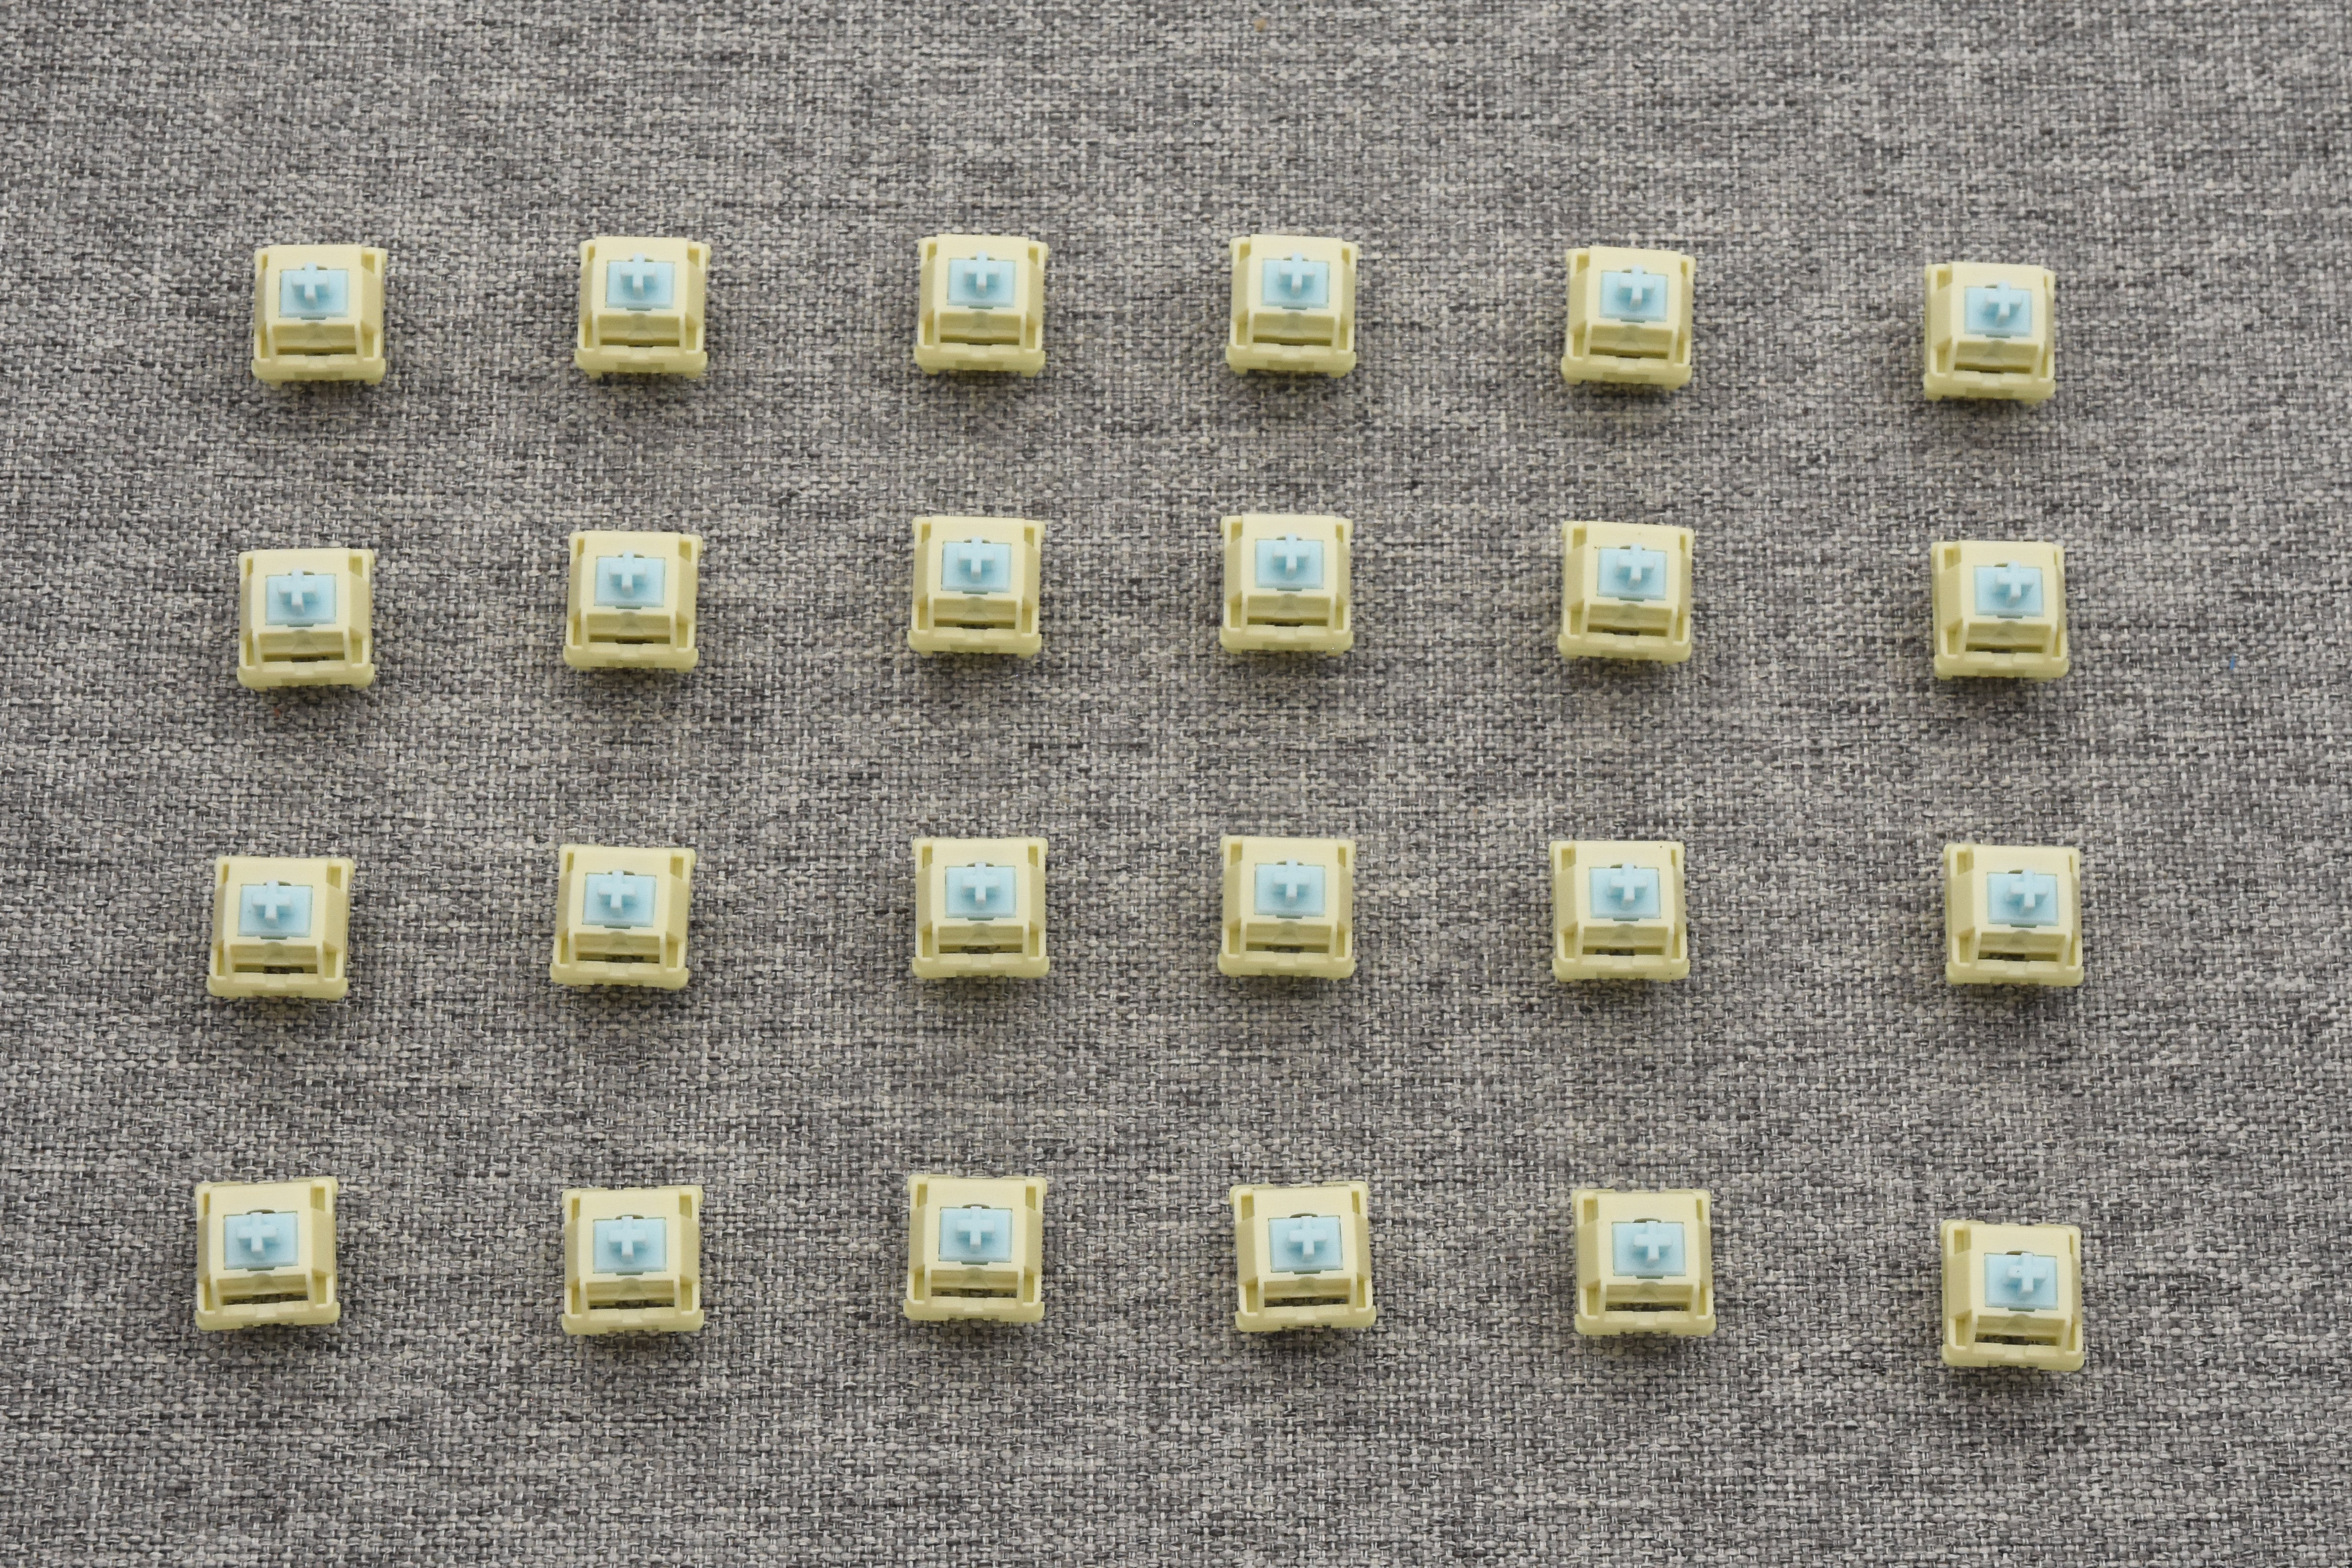 HMX GACHAPON LINEAR SWITCH FACTORY LUBED EDITION (10PCS)